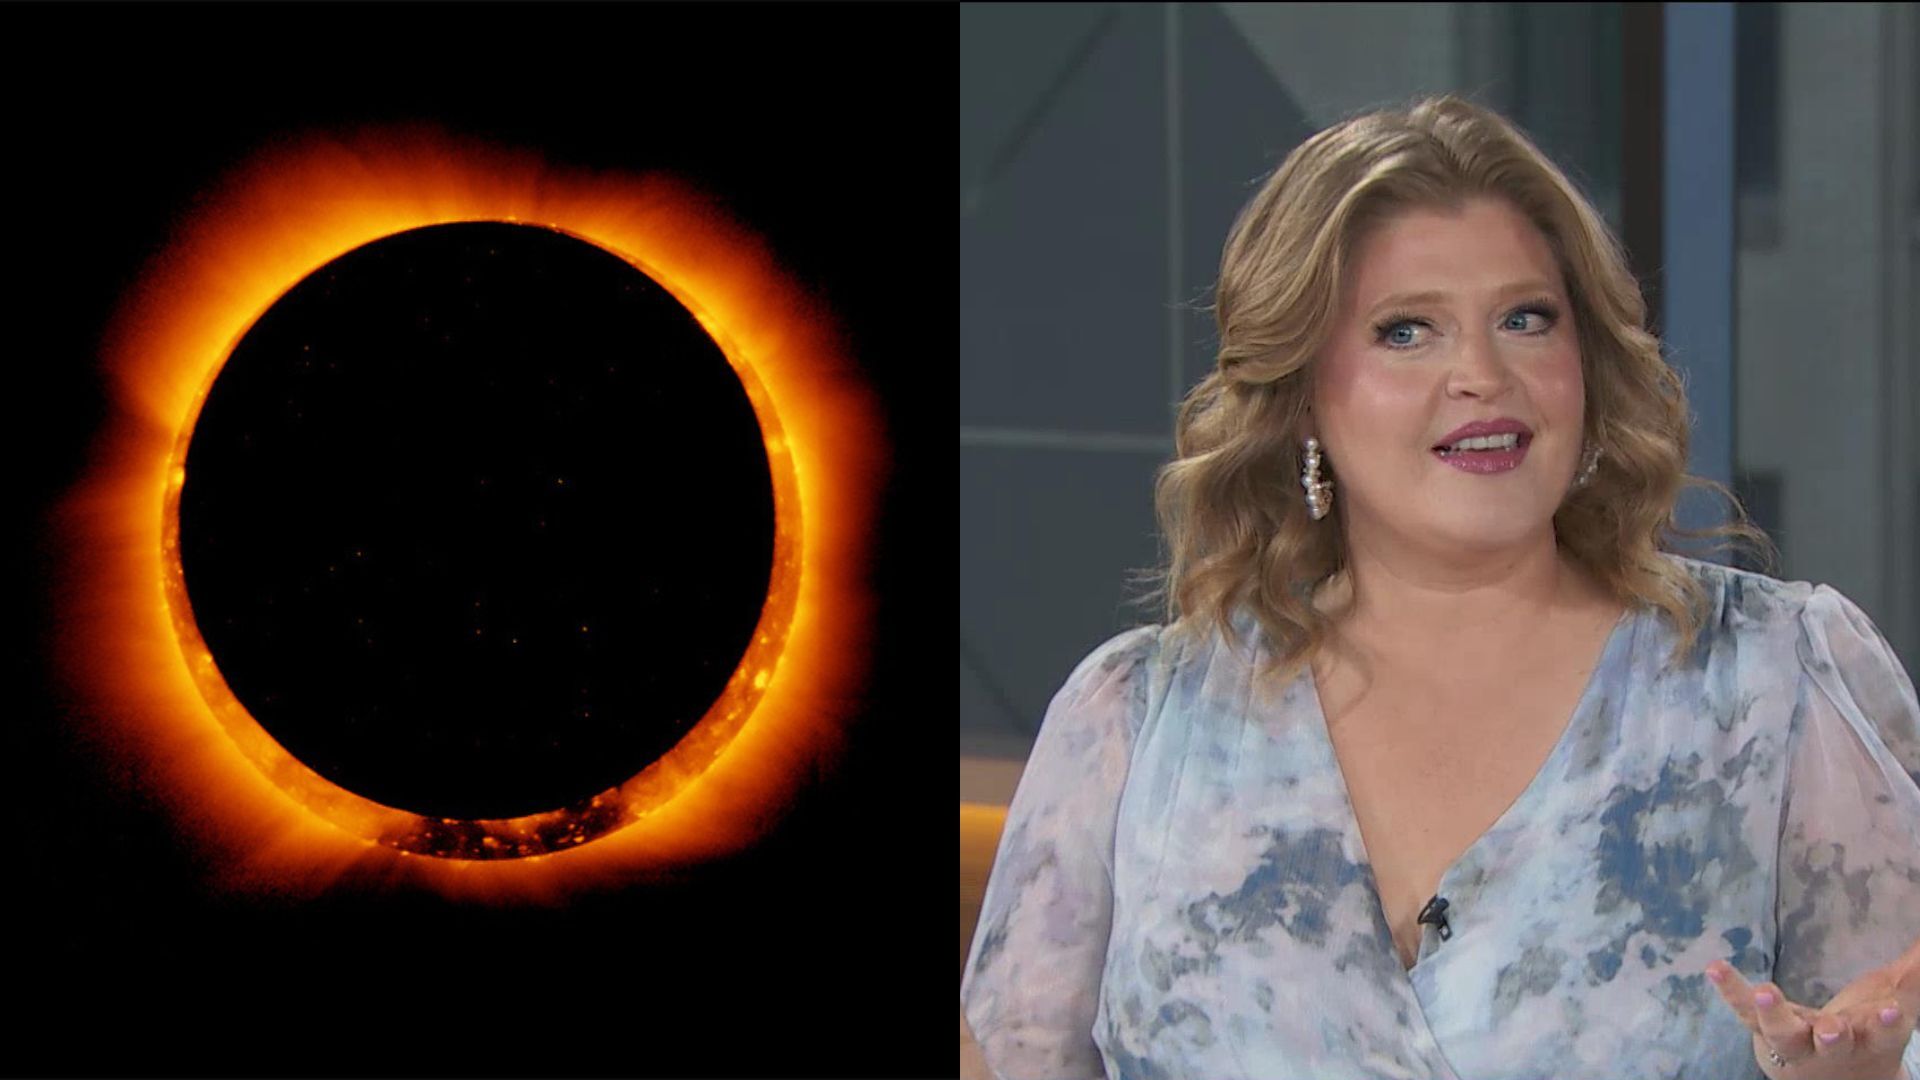 Our (honest) thoughts on yesterday's eclipse